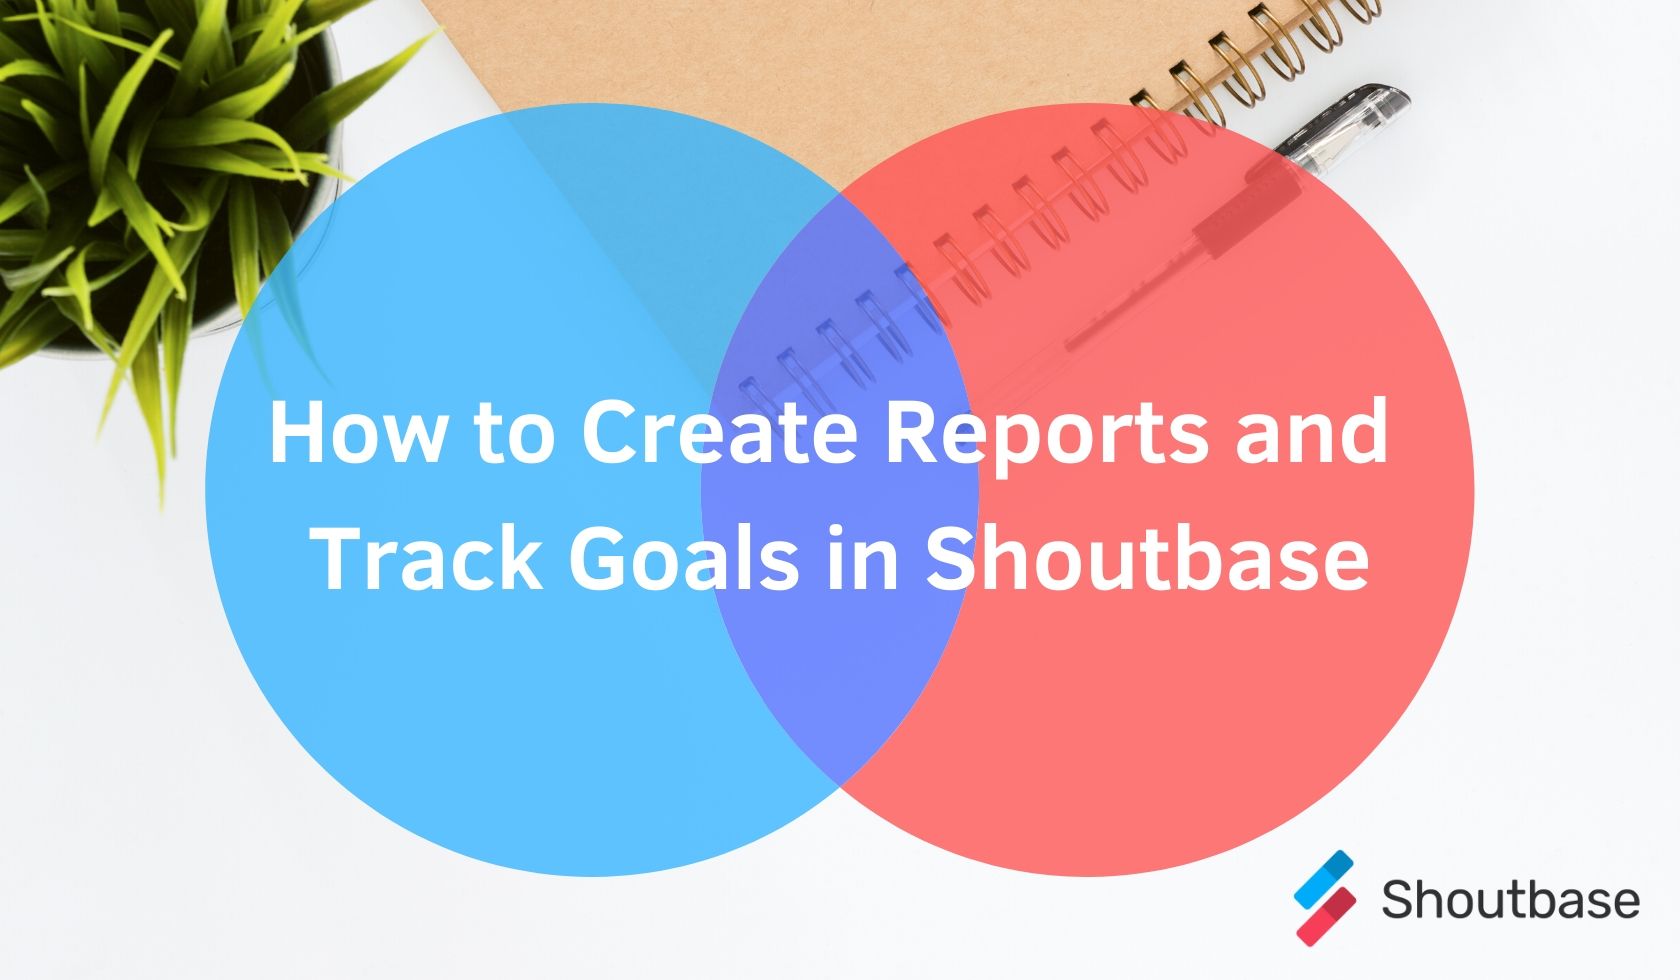 How to Create Reports and Track Goals in Shoutbase